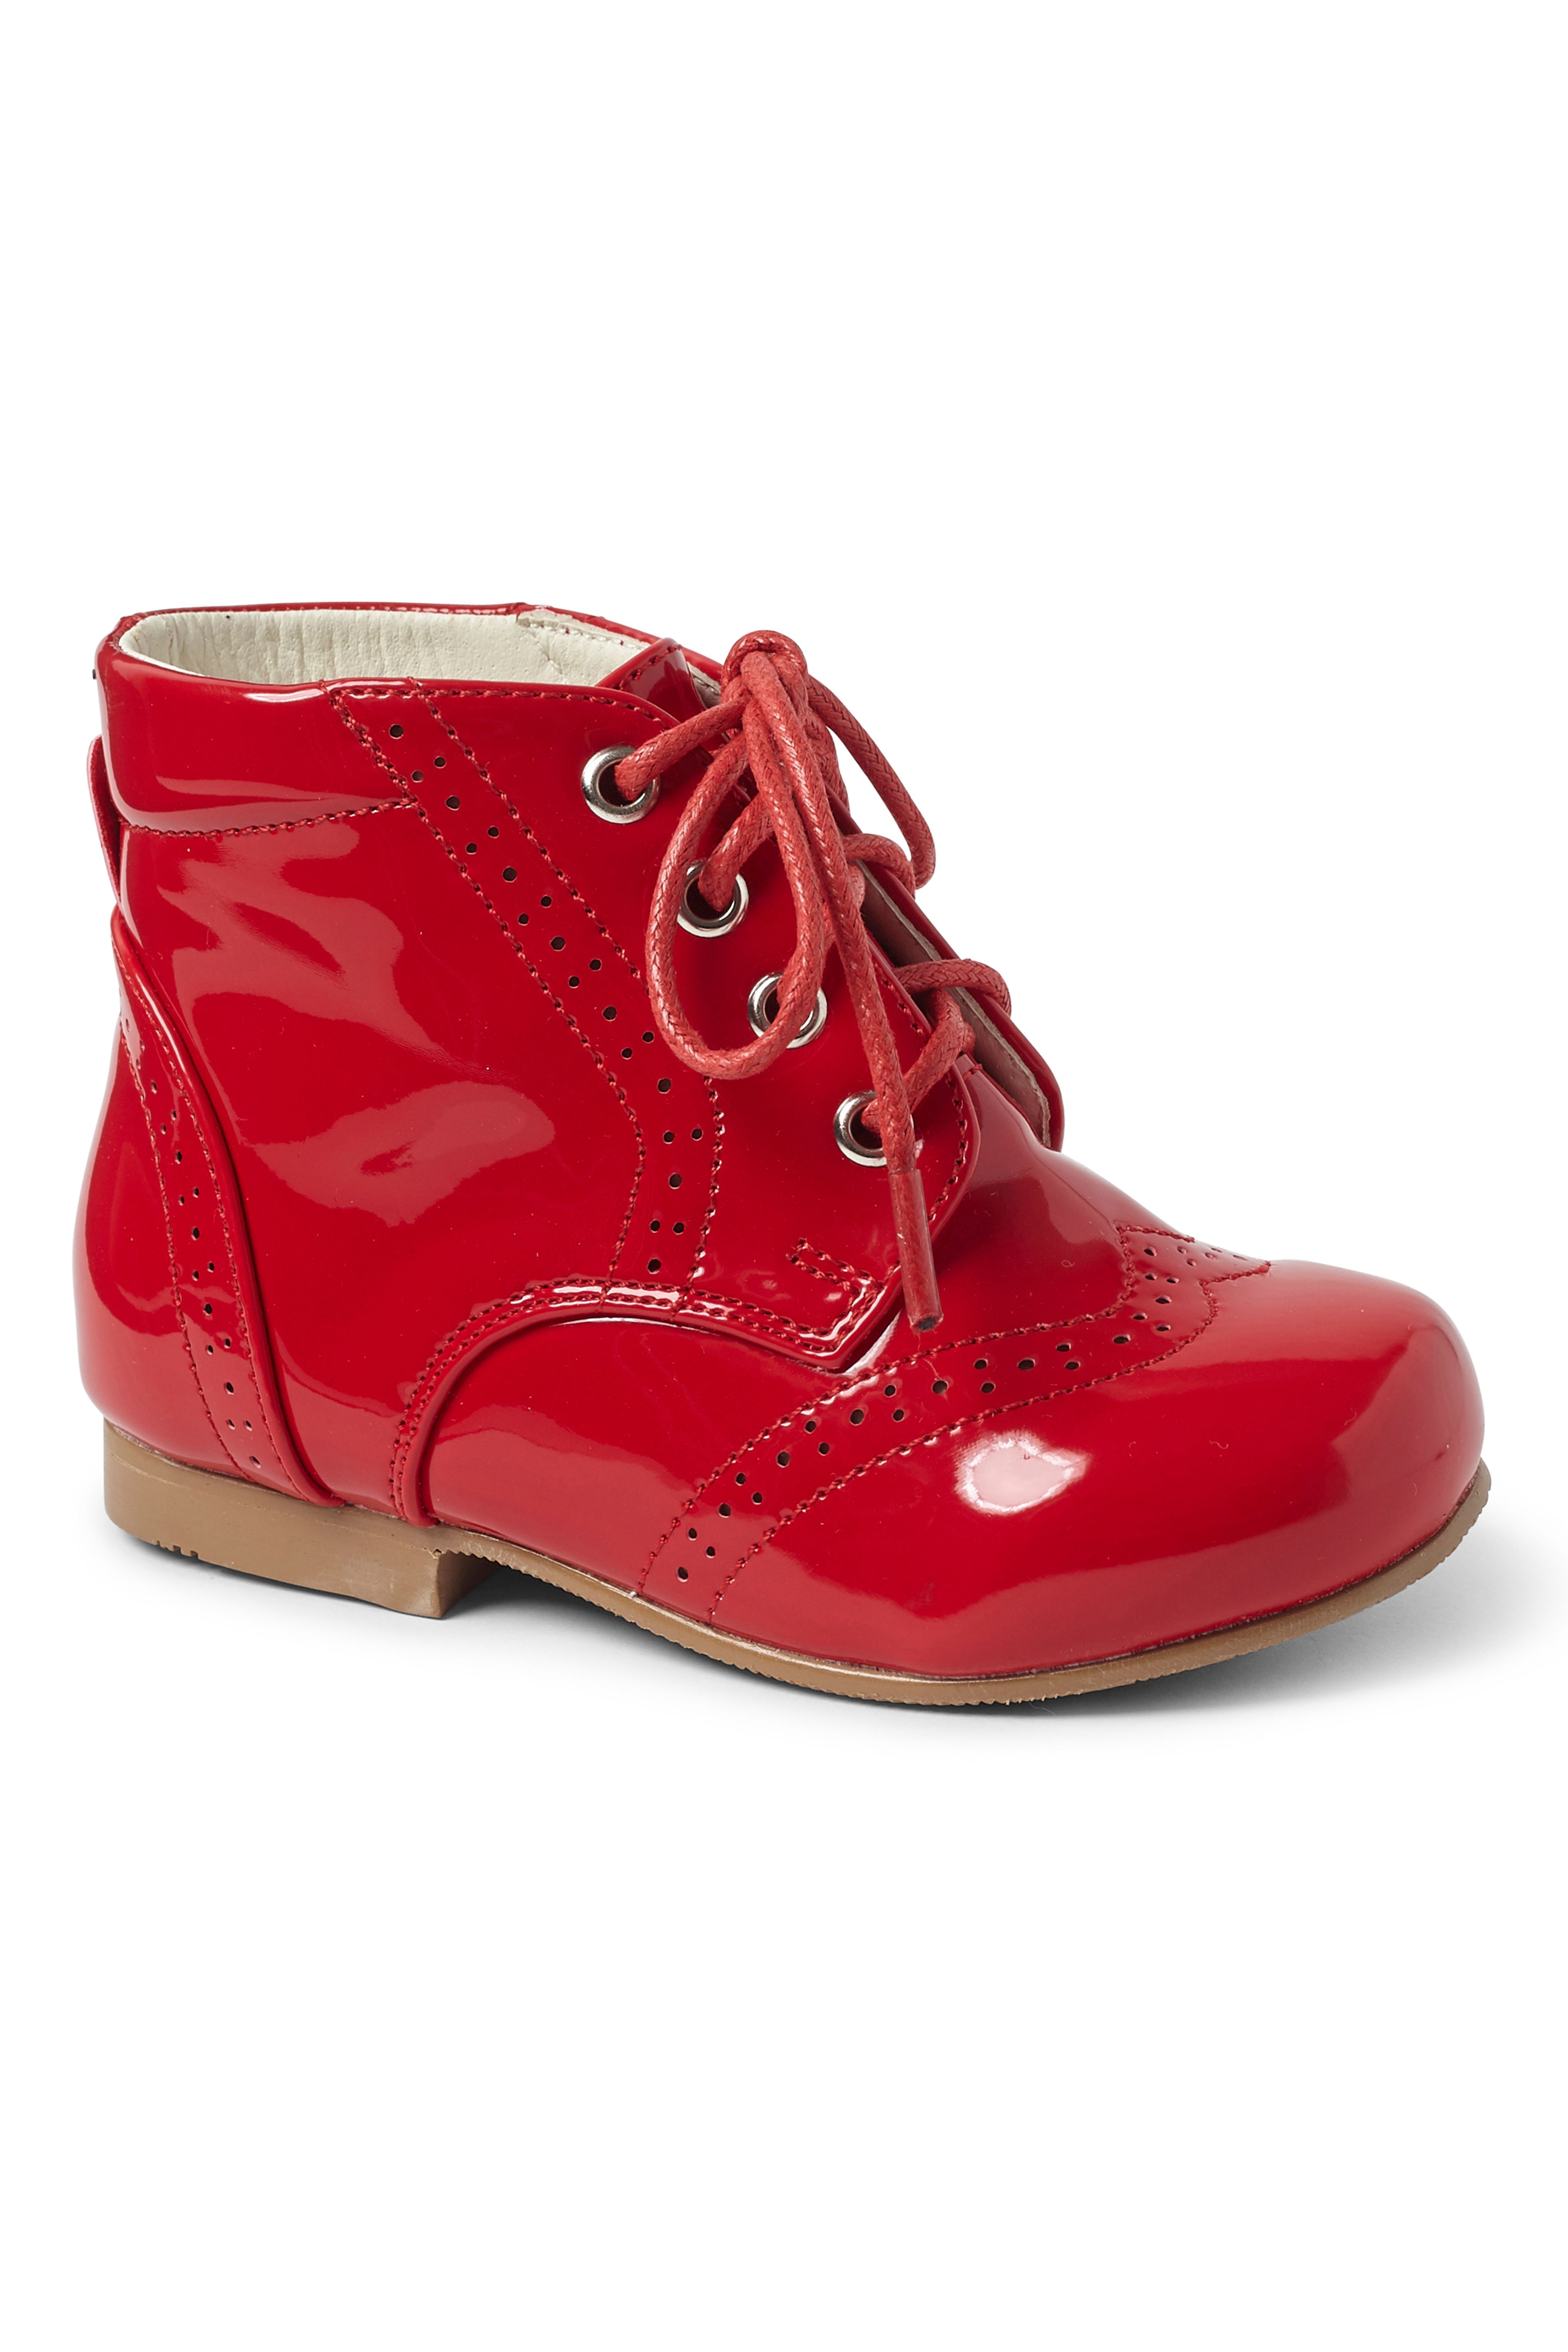 Unisex Kids Patent Leather Brogue Ankle Boots - QUINN  - Red